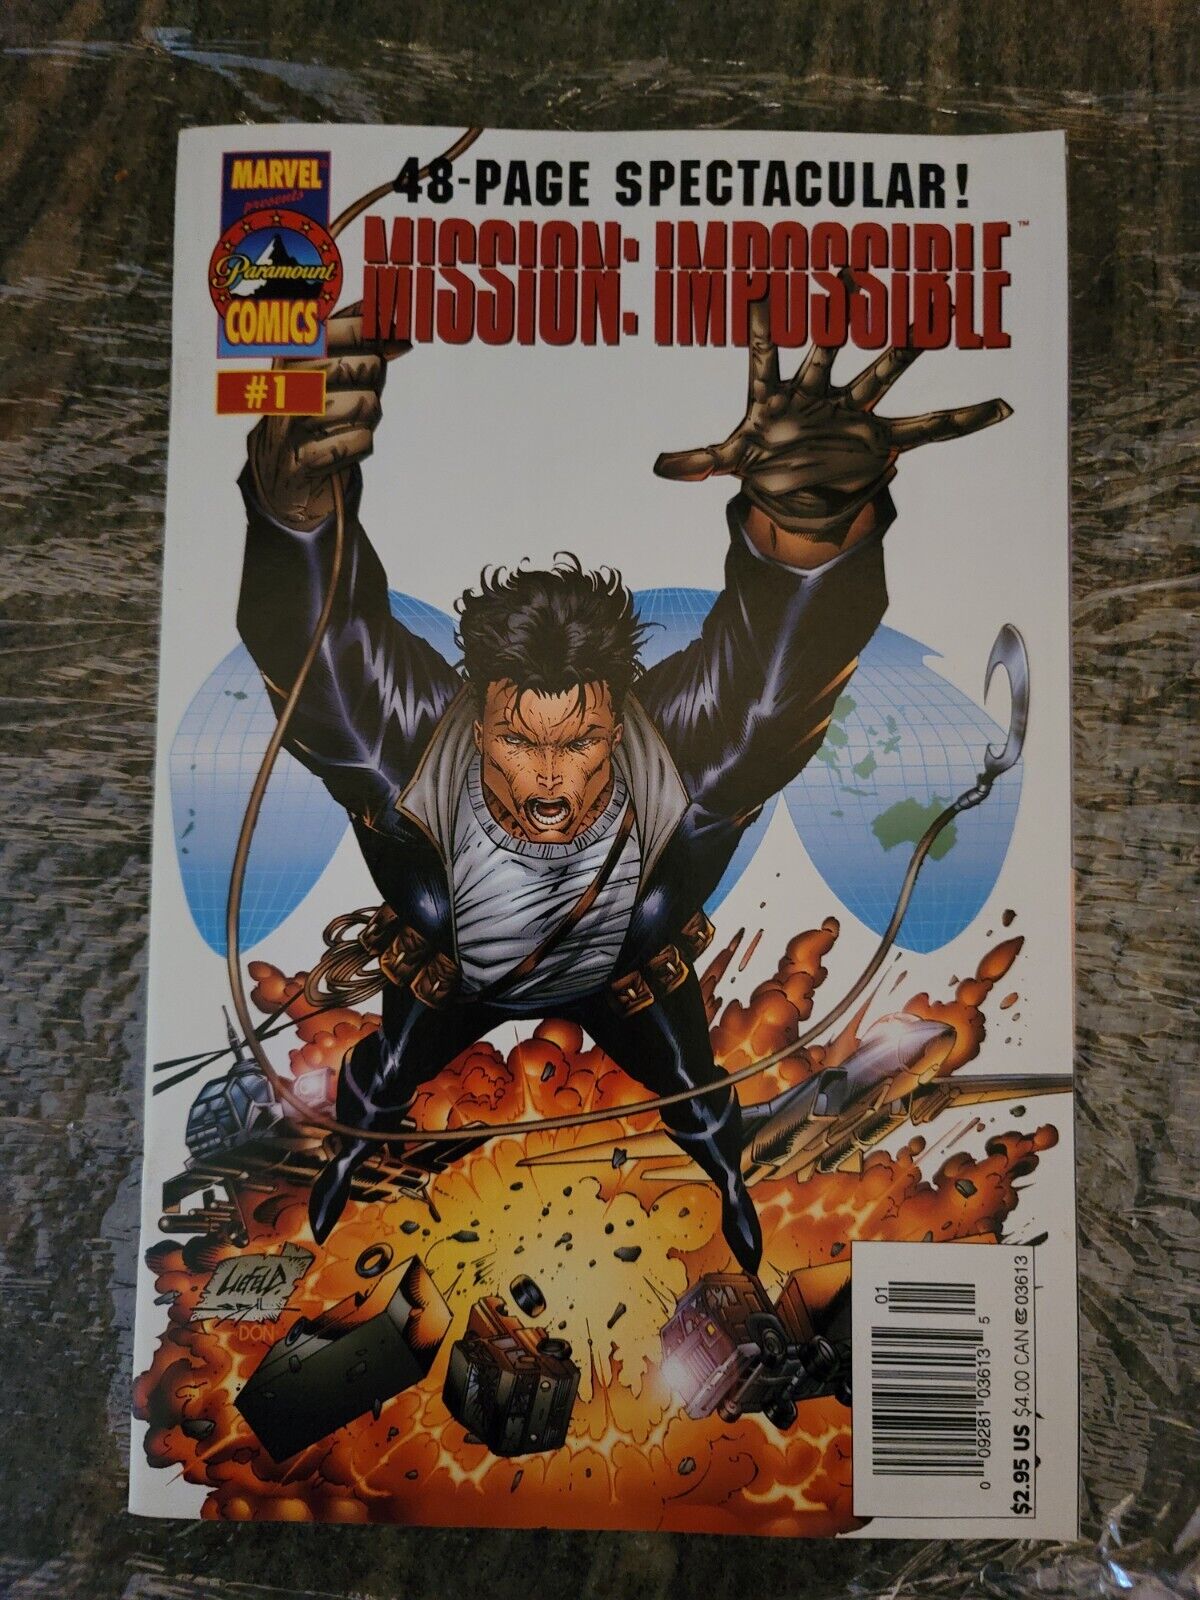 Marvel Mission Impossible #1 (Marvel Comics May 1996)